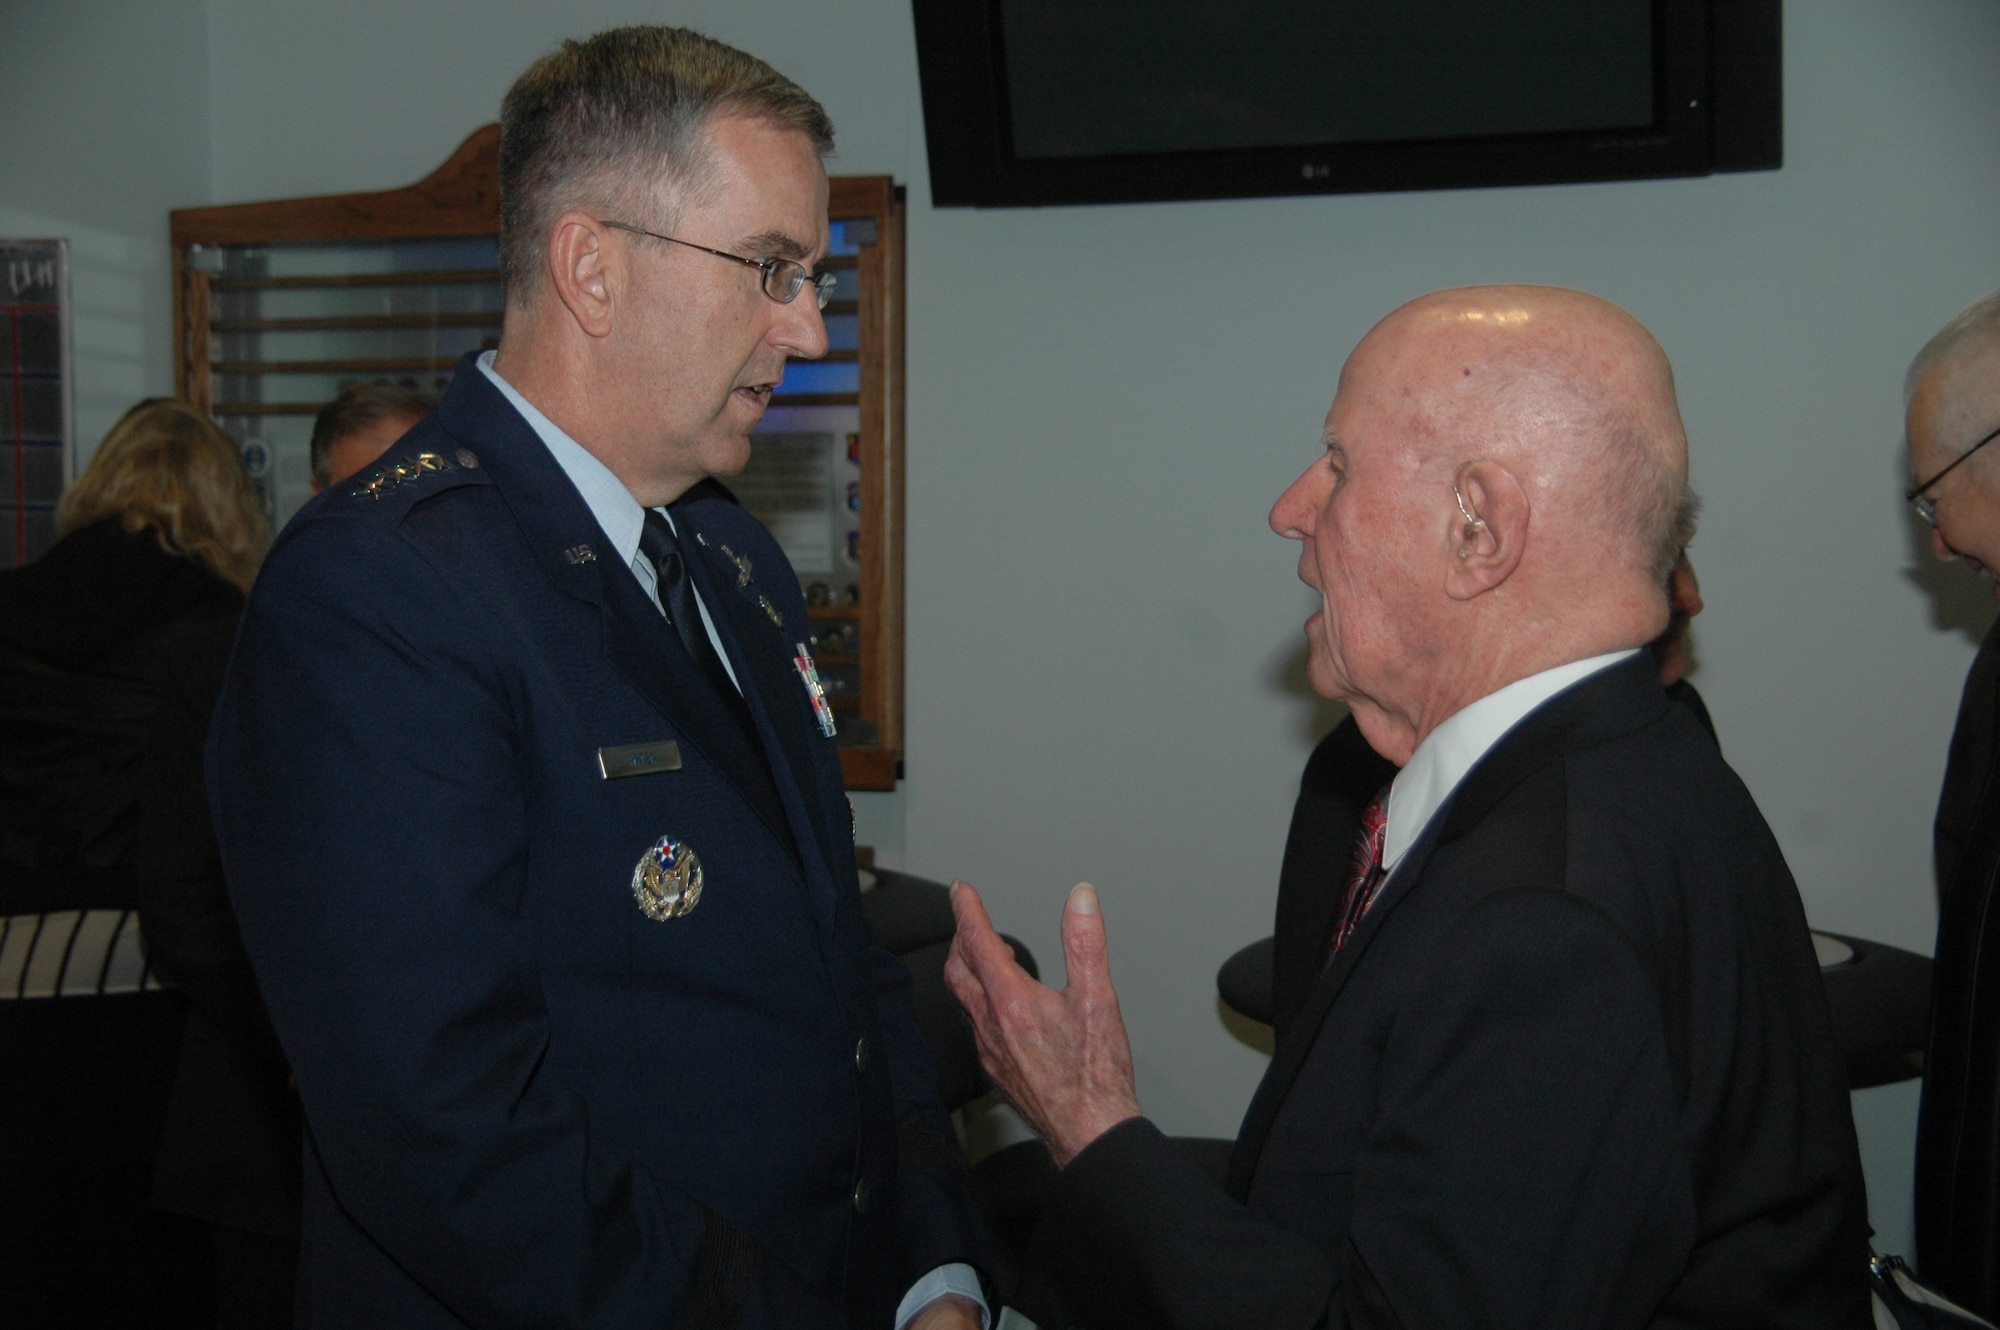 Gen. John Hyten, commander, Air Force Space Command, Peterson Air Force Base, Colo. talks with 94-year-old retired Col. Thomas Haig, one of six early Air Force and civilian space pioneers whose newly inscribed names were unveiled at the General Bernard A. Schriever Memorial located on the grounds of the Space and Missile Systems Center at Los Angeles Air Force Base in El Segundo, Calif. Col. Haig managed requirements for satellite ground support at the Air Force Ballistic Missile Division until 1961, developing tracking and control stations for early surveillance programs. When the National Reconnaissance Office established a meteorological satellite program to provide information on cloud cover over the Soviet Union for its Corona photographic reconnaissance satellites, Haig created and managed the Defense Meteorological Satellite Program for the NRO. (U.S. Air Force photo/James Spellman, Jr.)